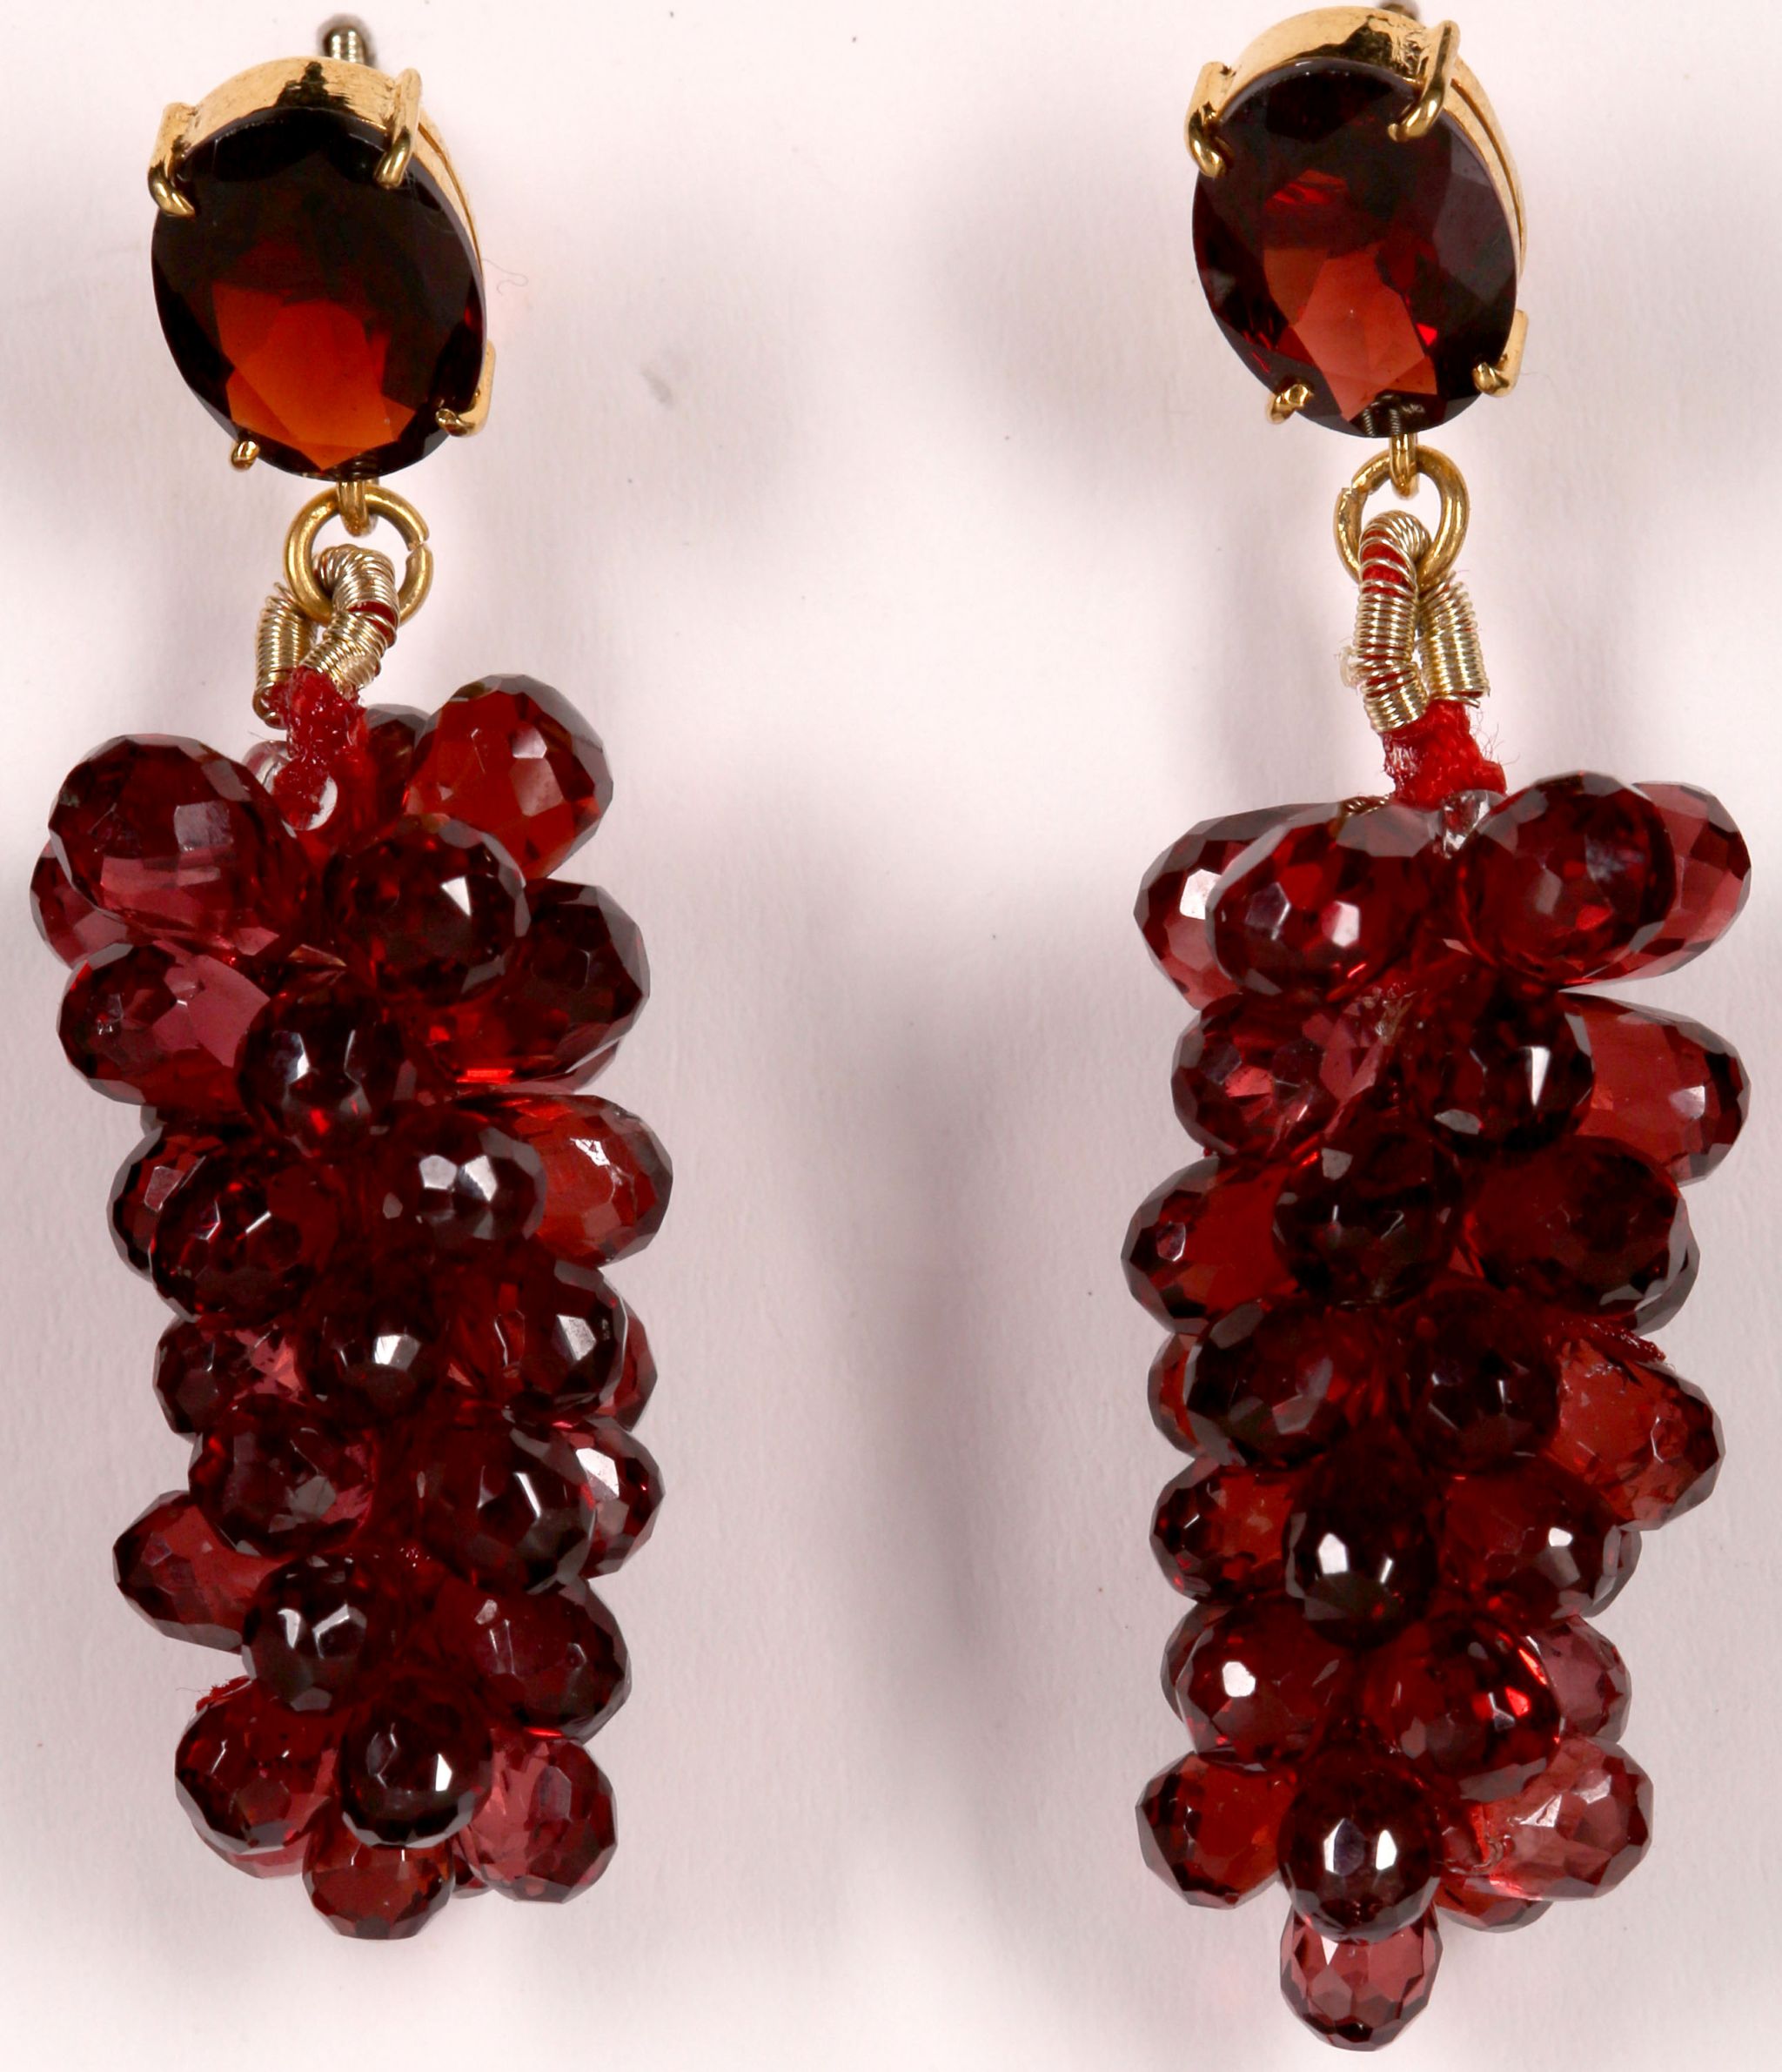 A pair of 14k gold and garnet cluster drop earrings.